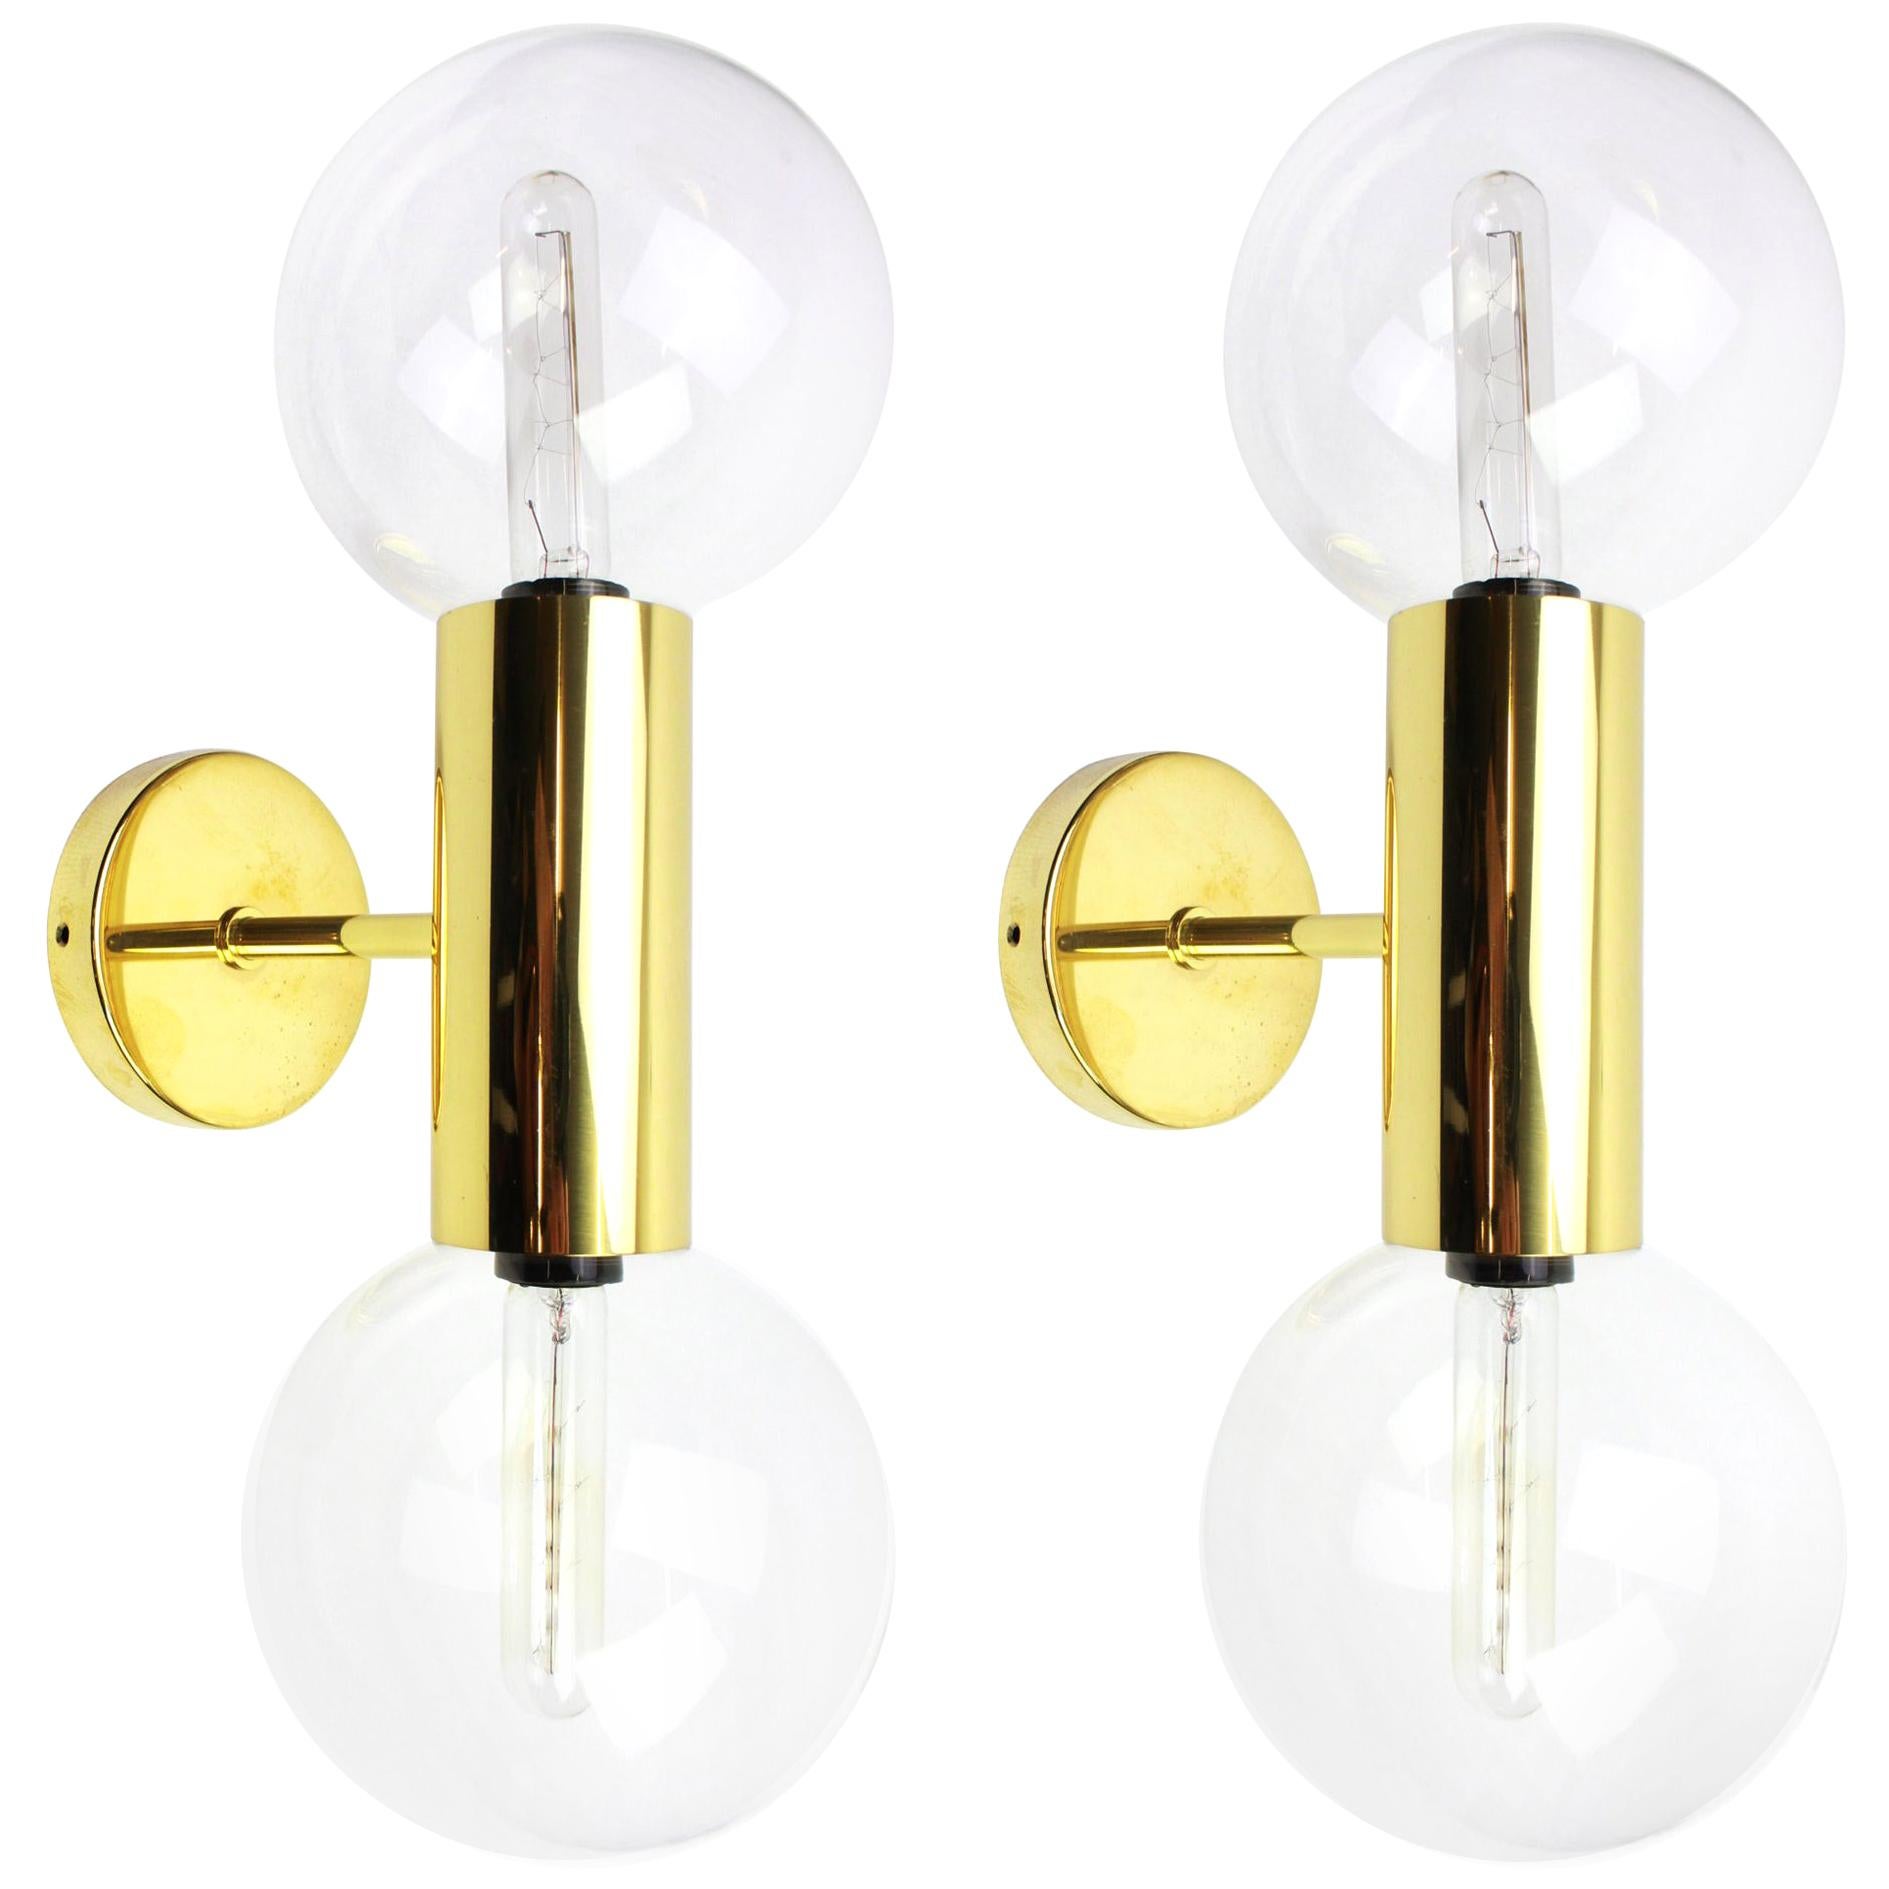 Midcentury Pair of Wall Sconces Design Motoko Ishii by Staff, Germany, 1970s For Sale